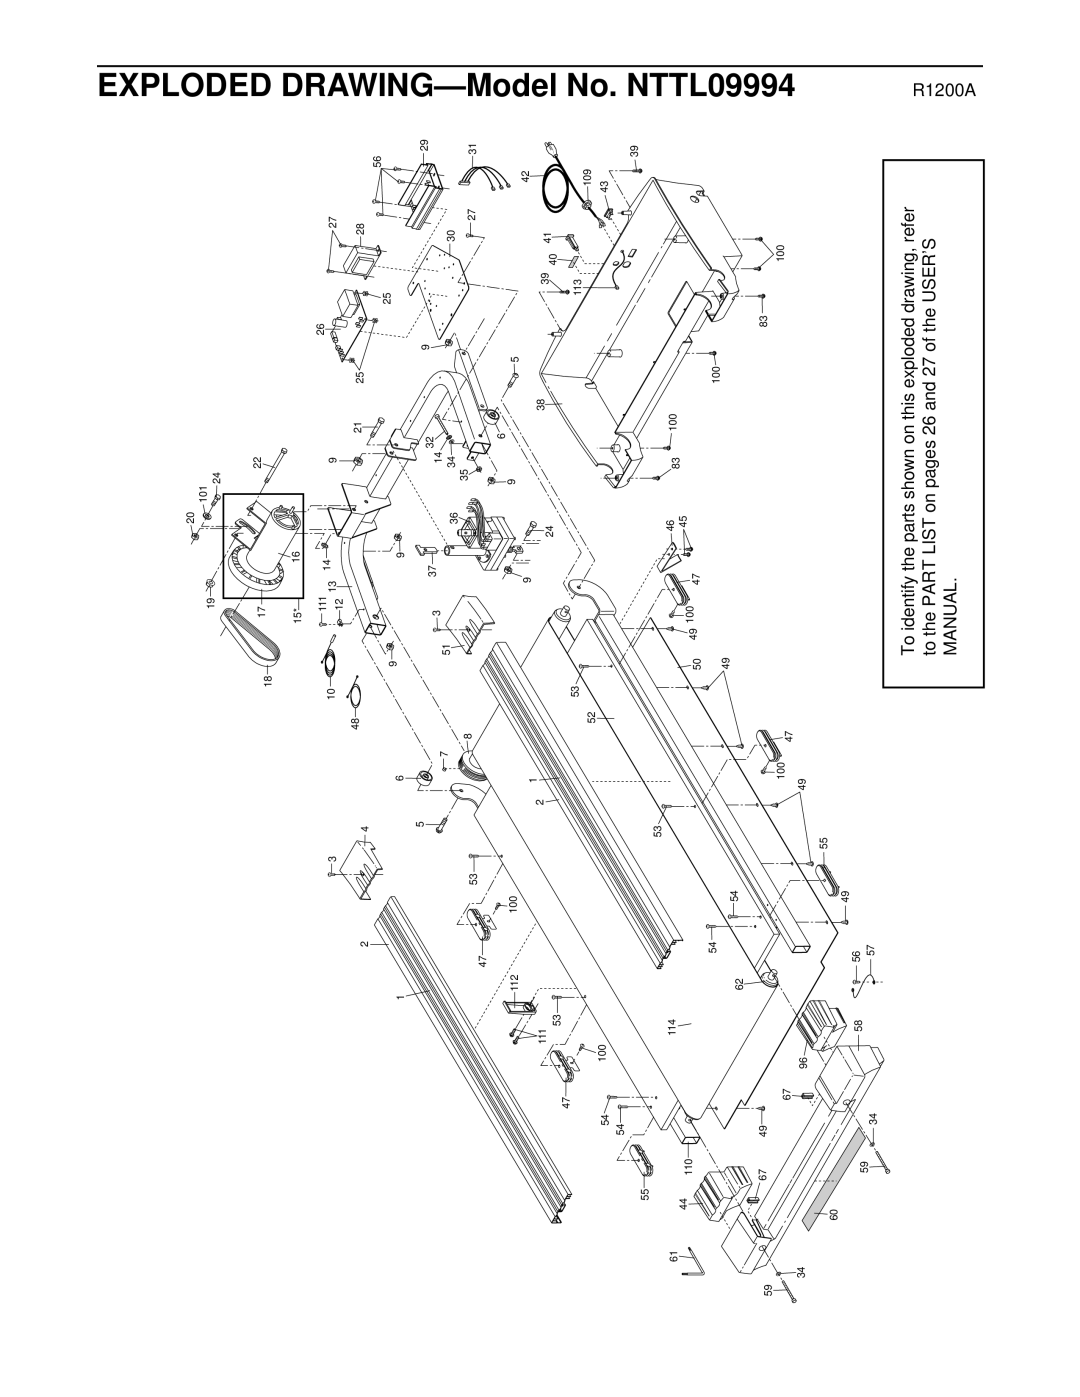 NordicTrack user manual EXPLODED DRAWING-Model No. NTTL09994, R1200A 